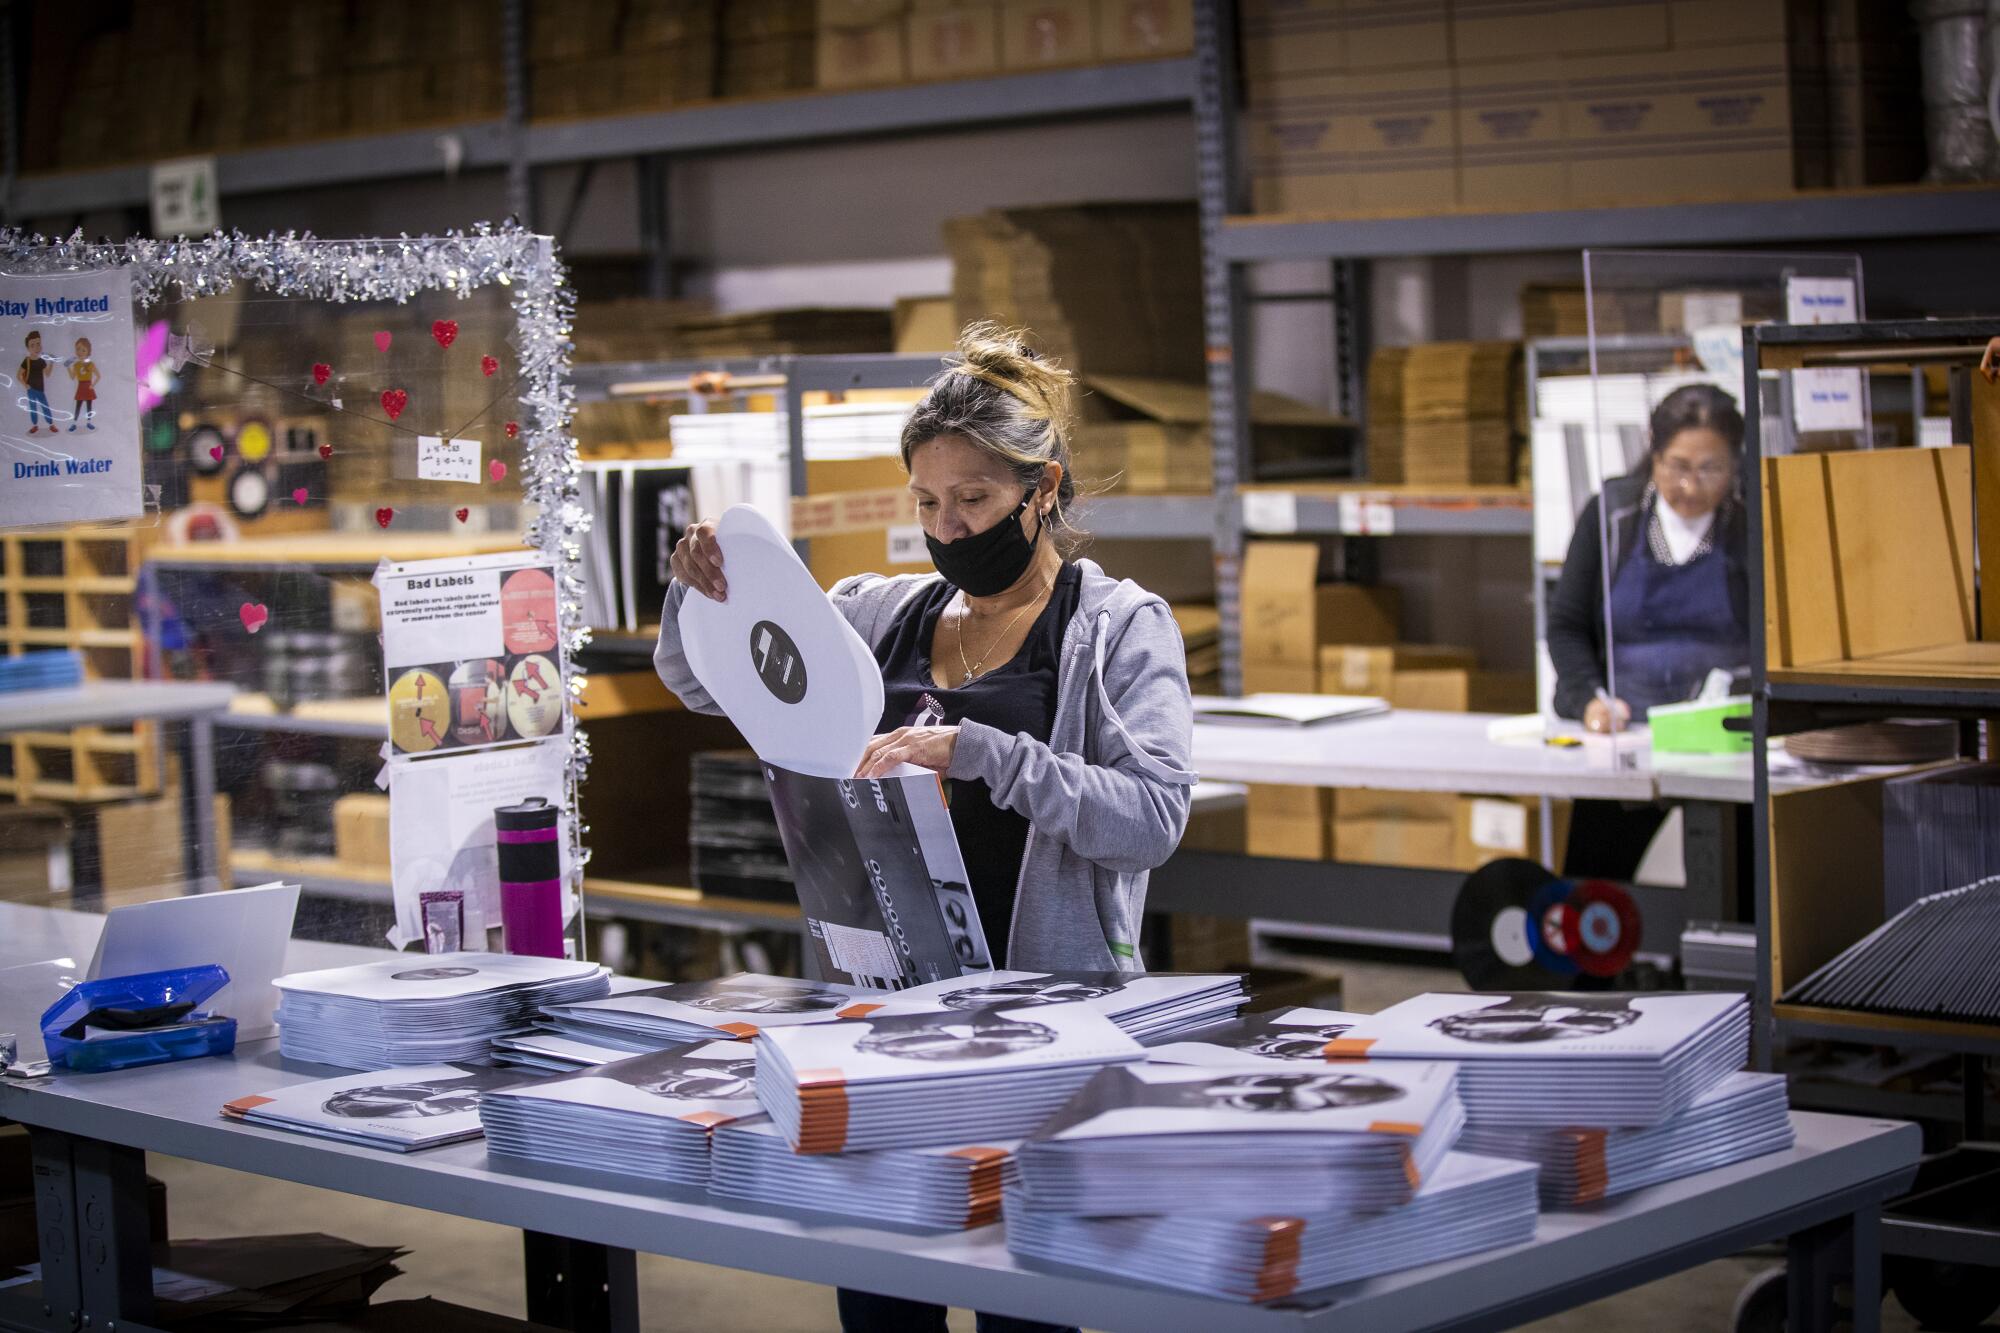 How LP pressing plants are handling booming vinyl demand - Marketplace